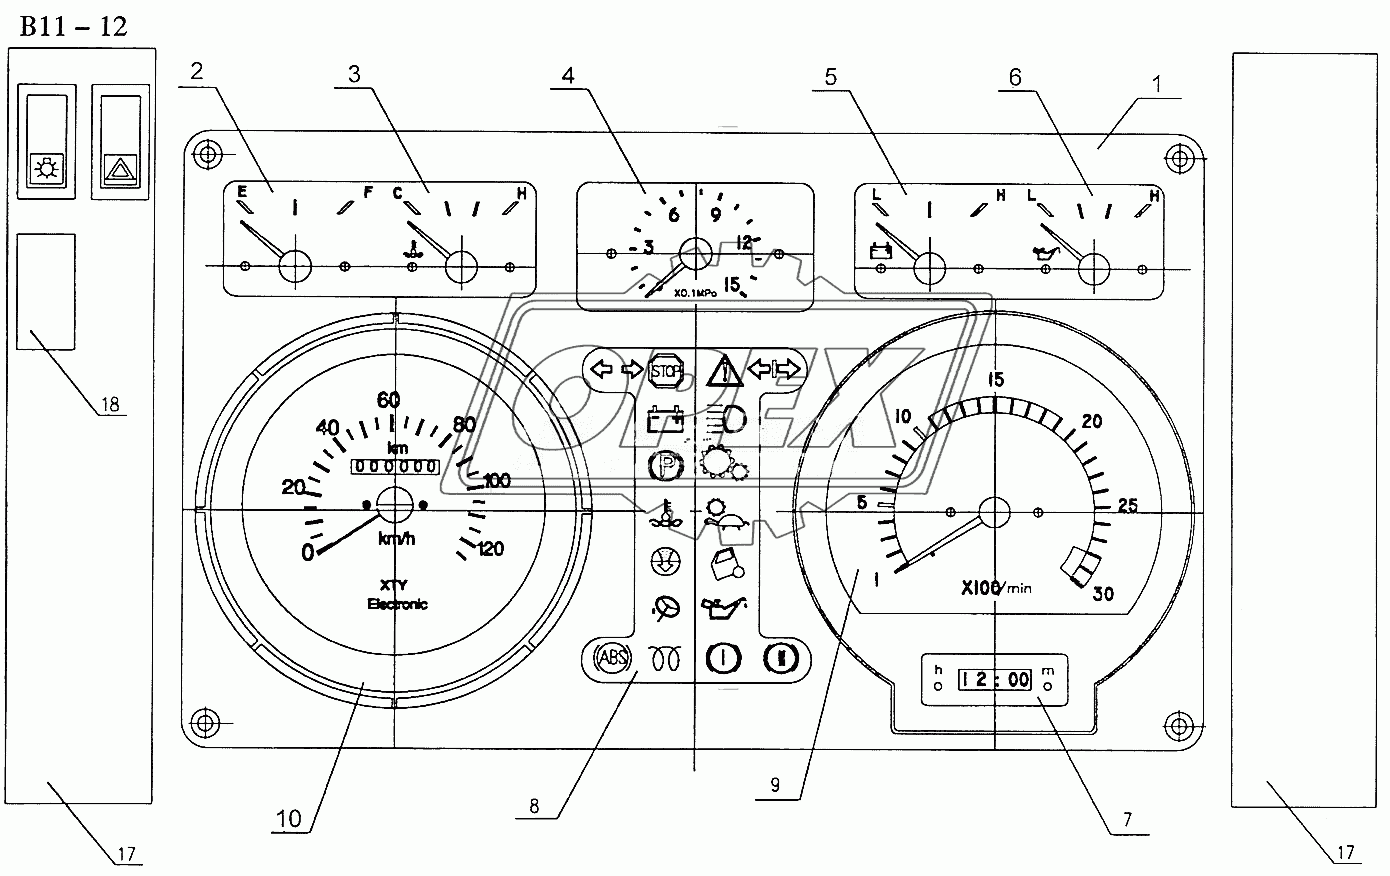 7001 TYPE ELECTRICAL DASHBOARD (DRIVE RIGHT) (B11-12)